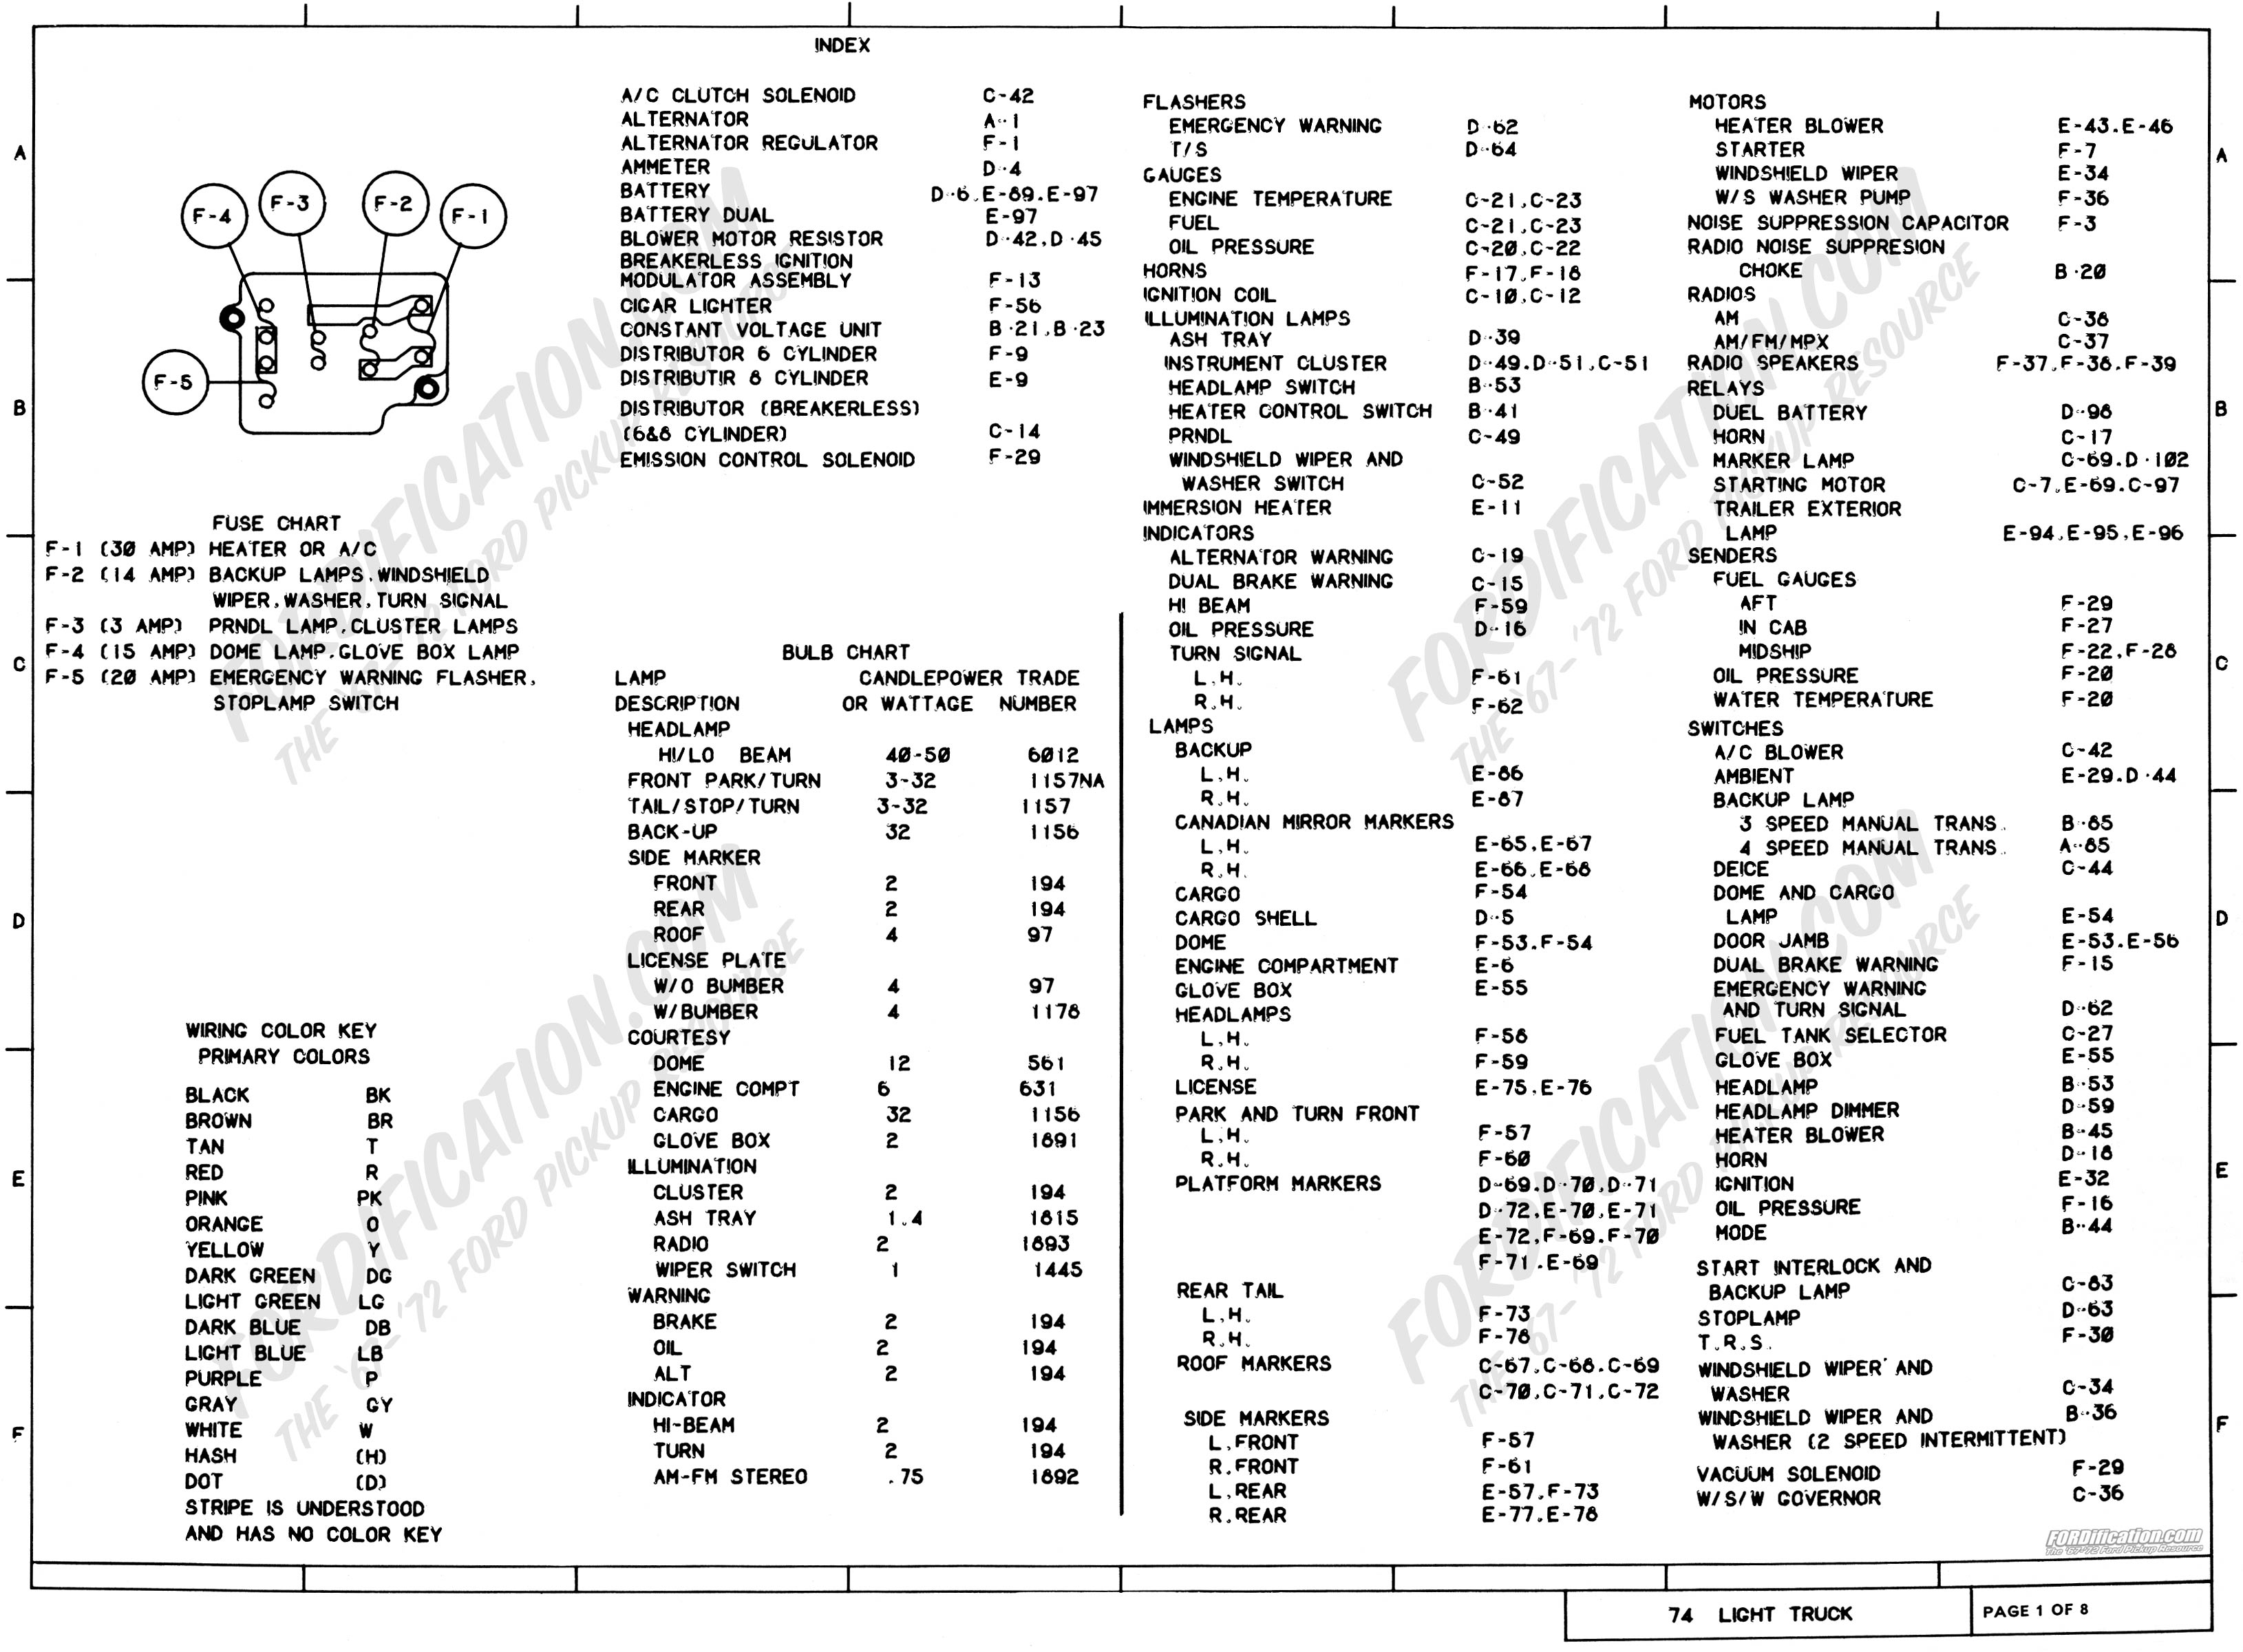 1977 Ford F150 Wiring Diagram from www.fordification.net